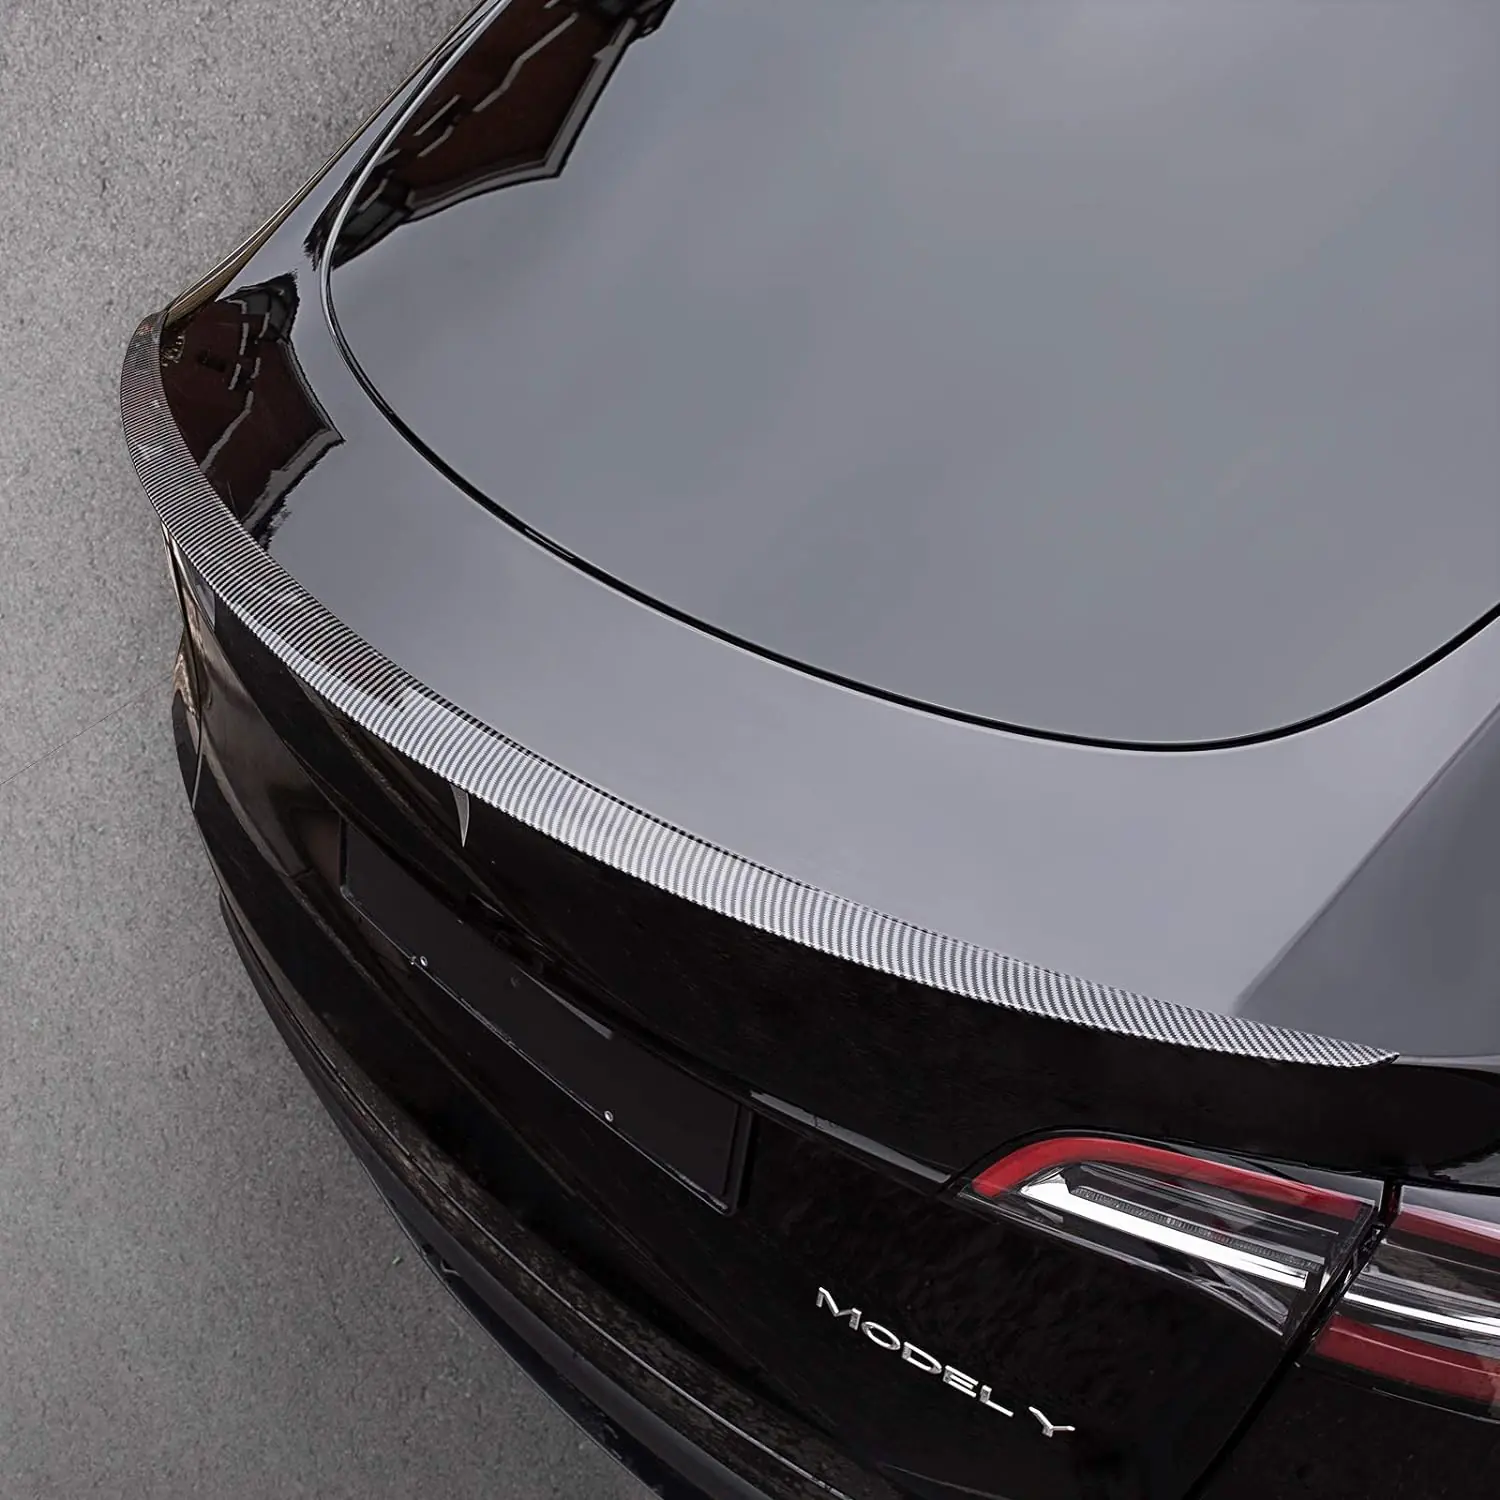 Get Your Adreama Tesla Model Y Performance Spoiler Now and Experience the Difference